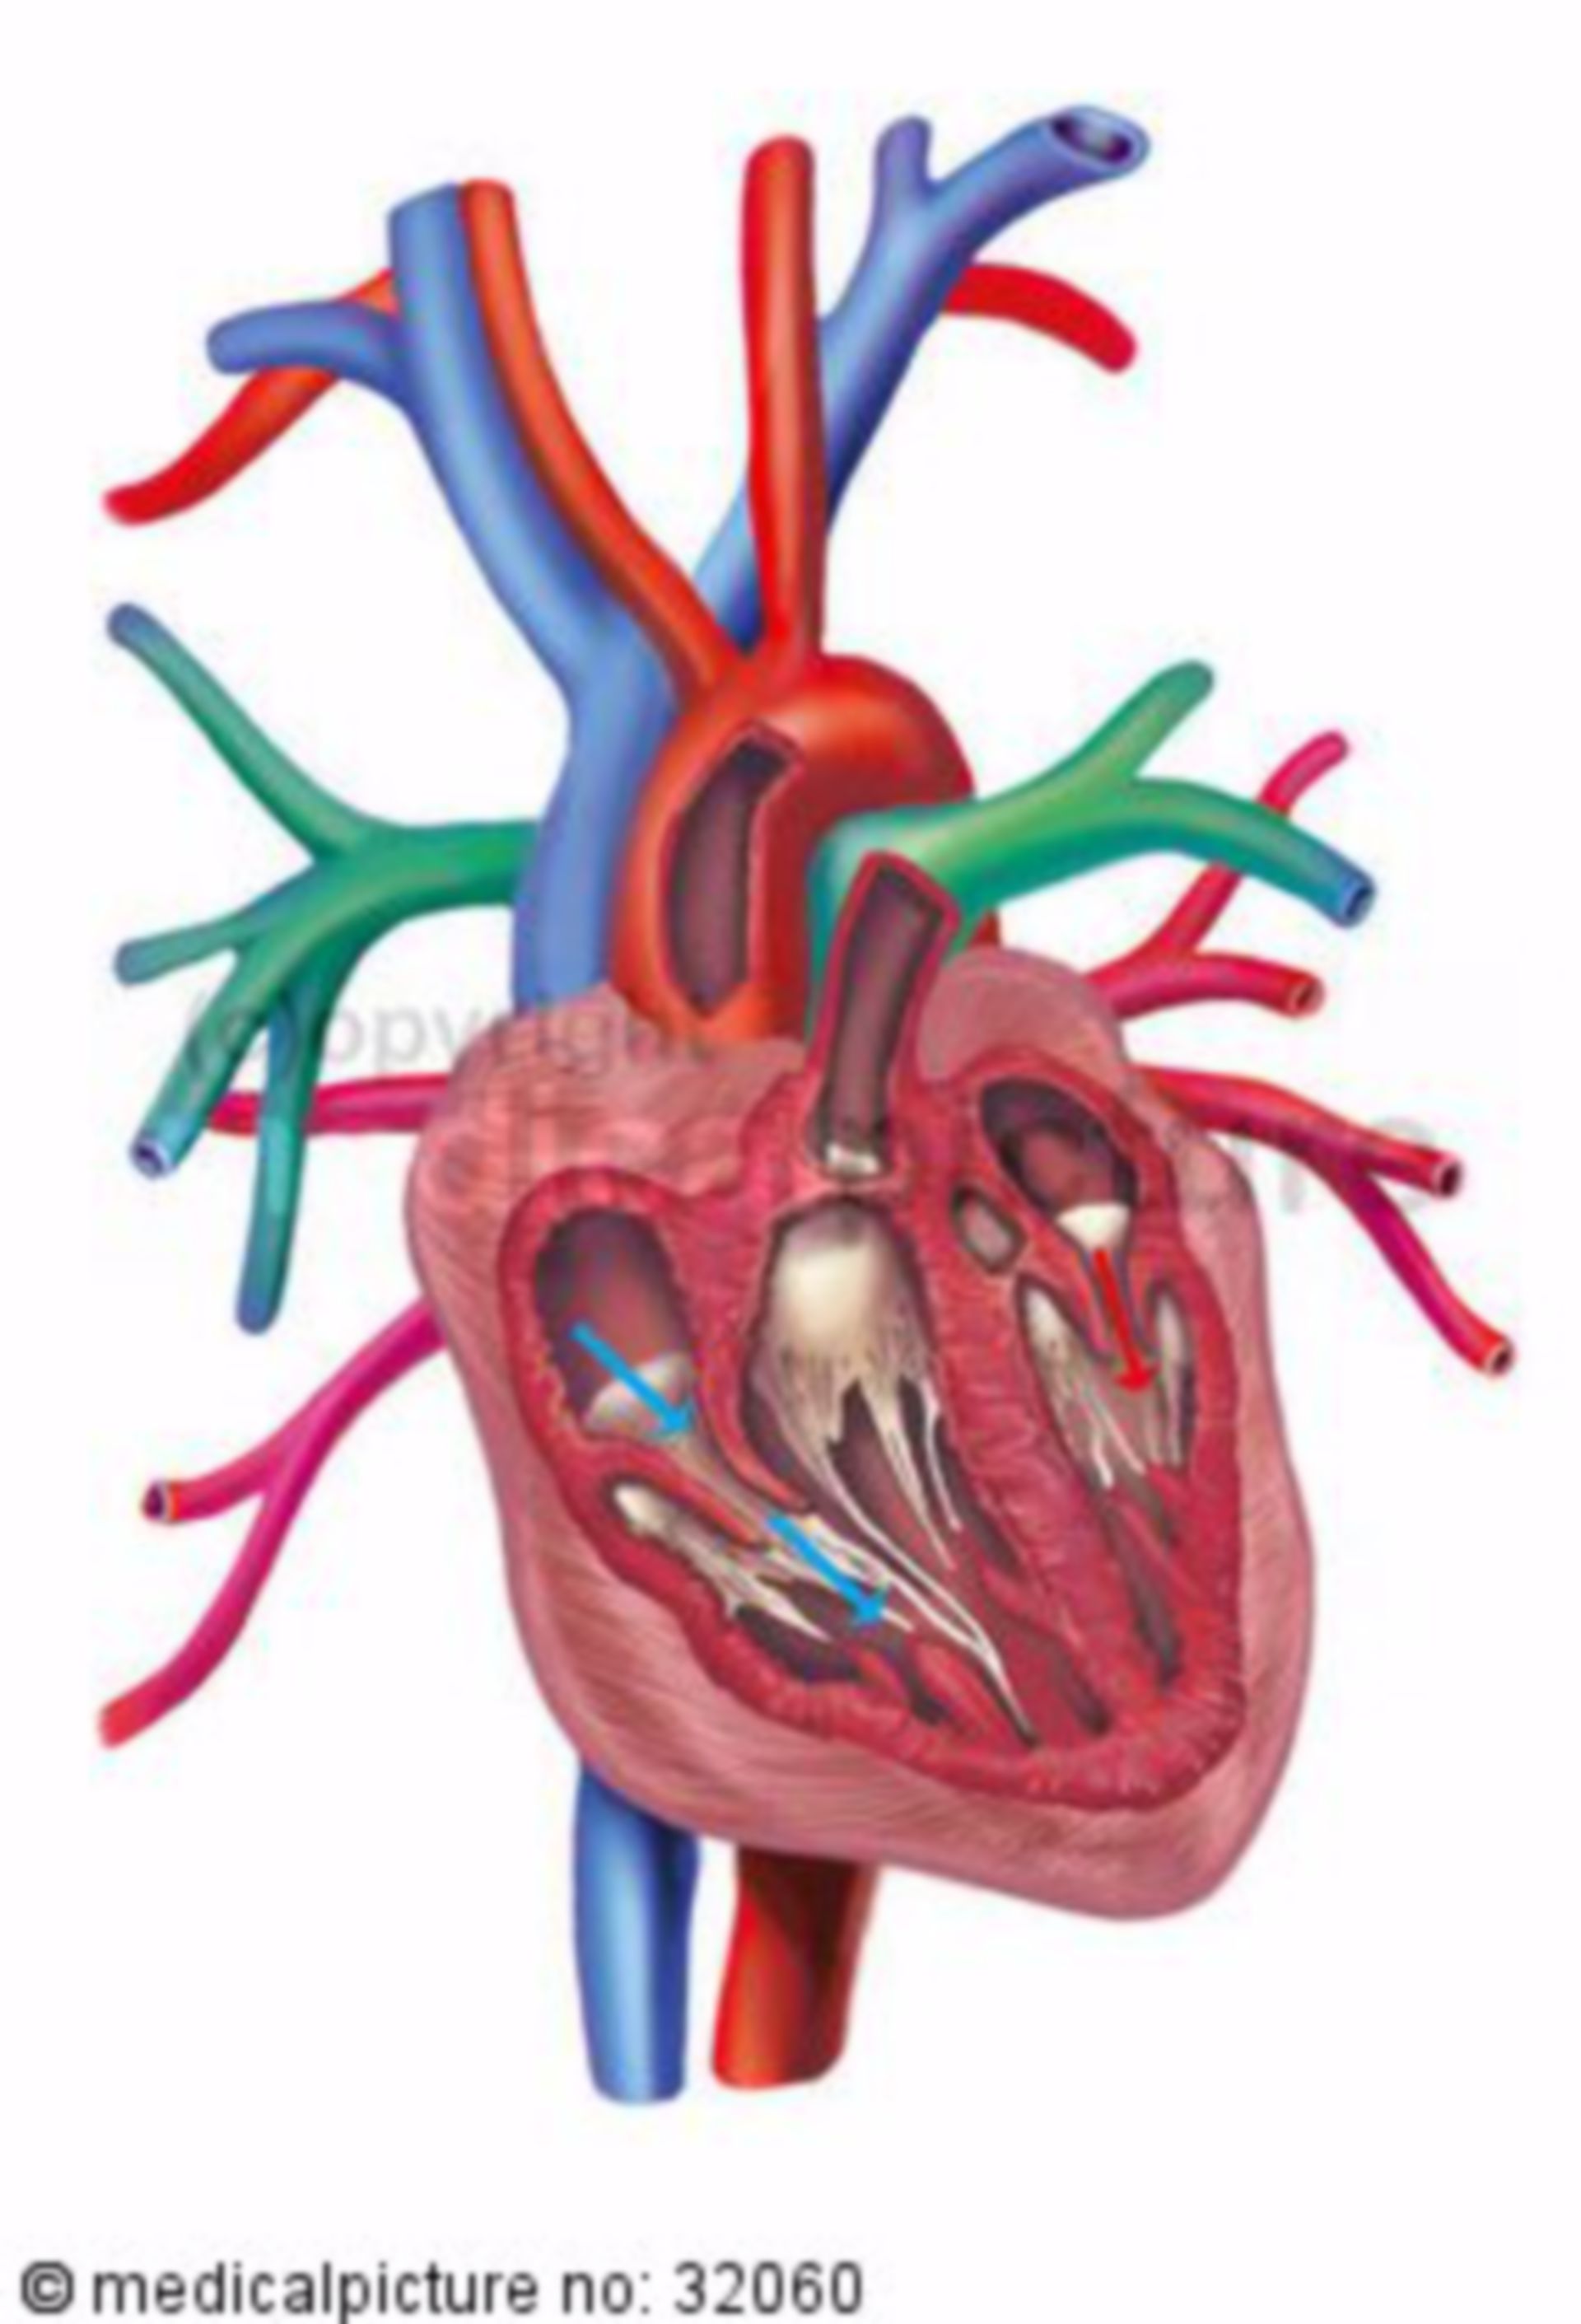 Blood flow in the human heart